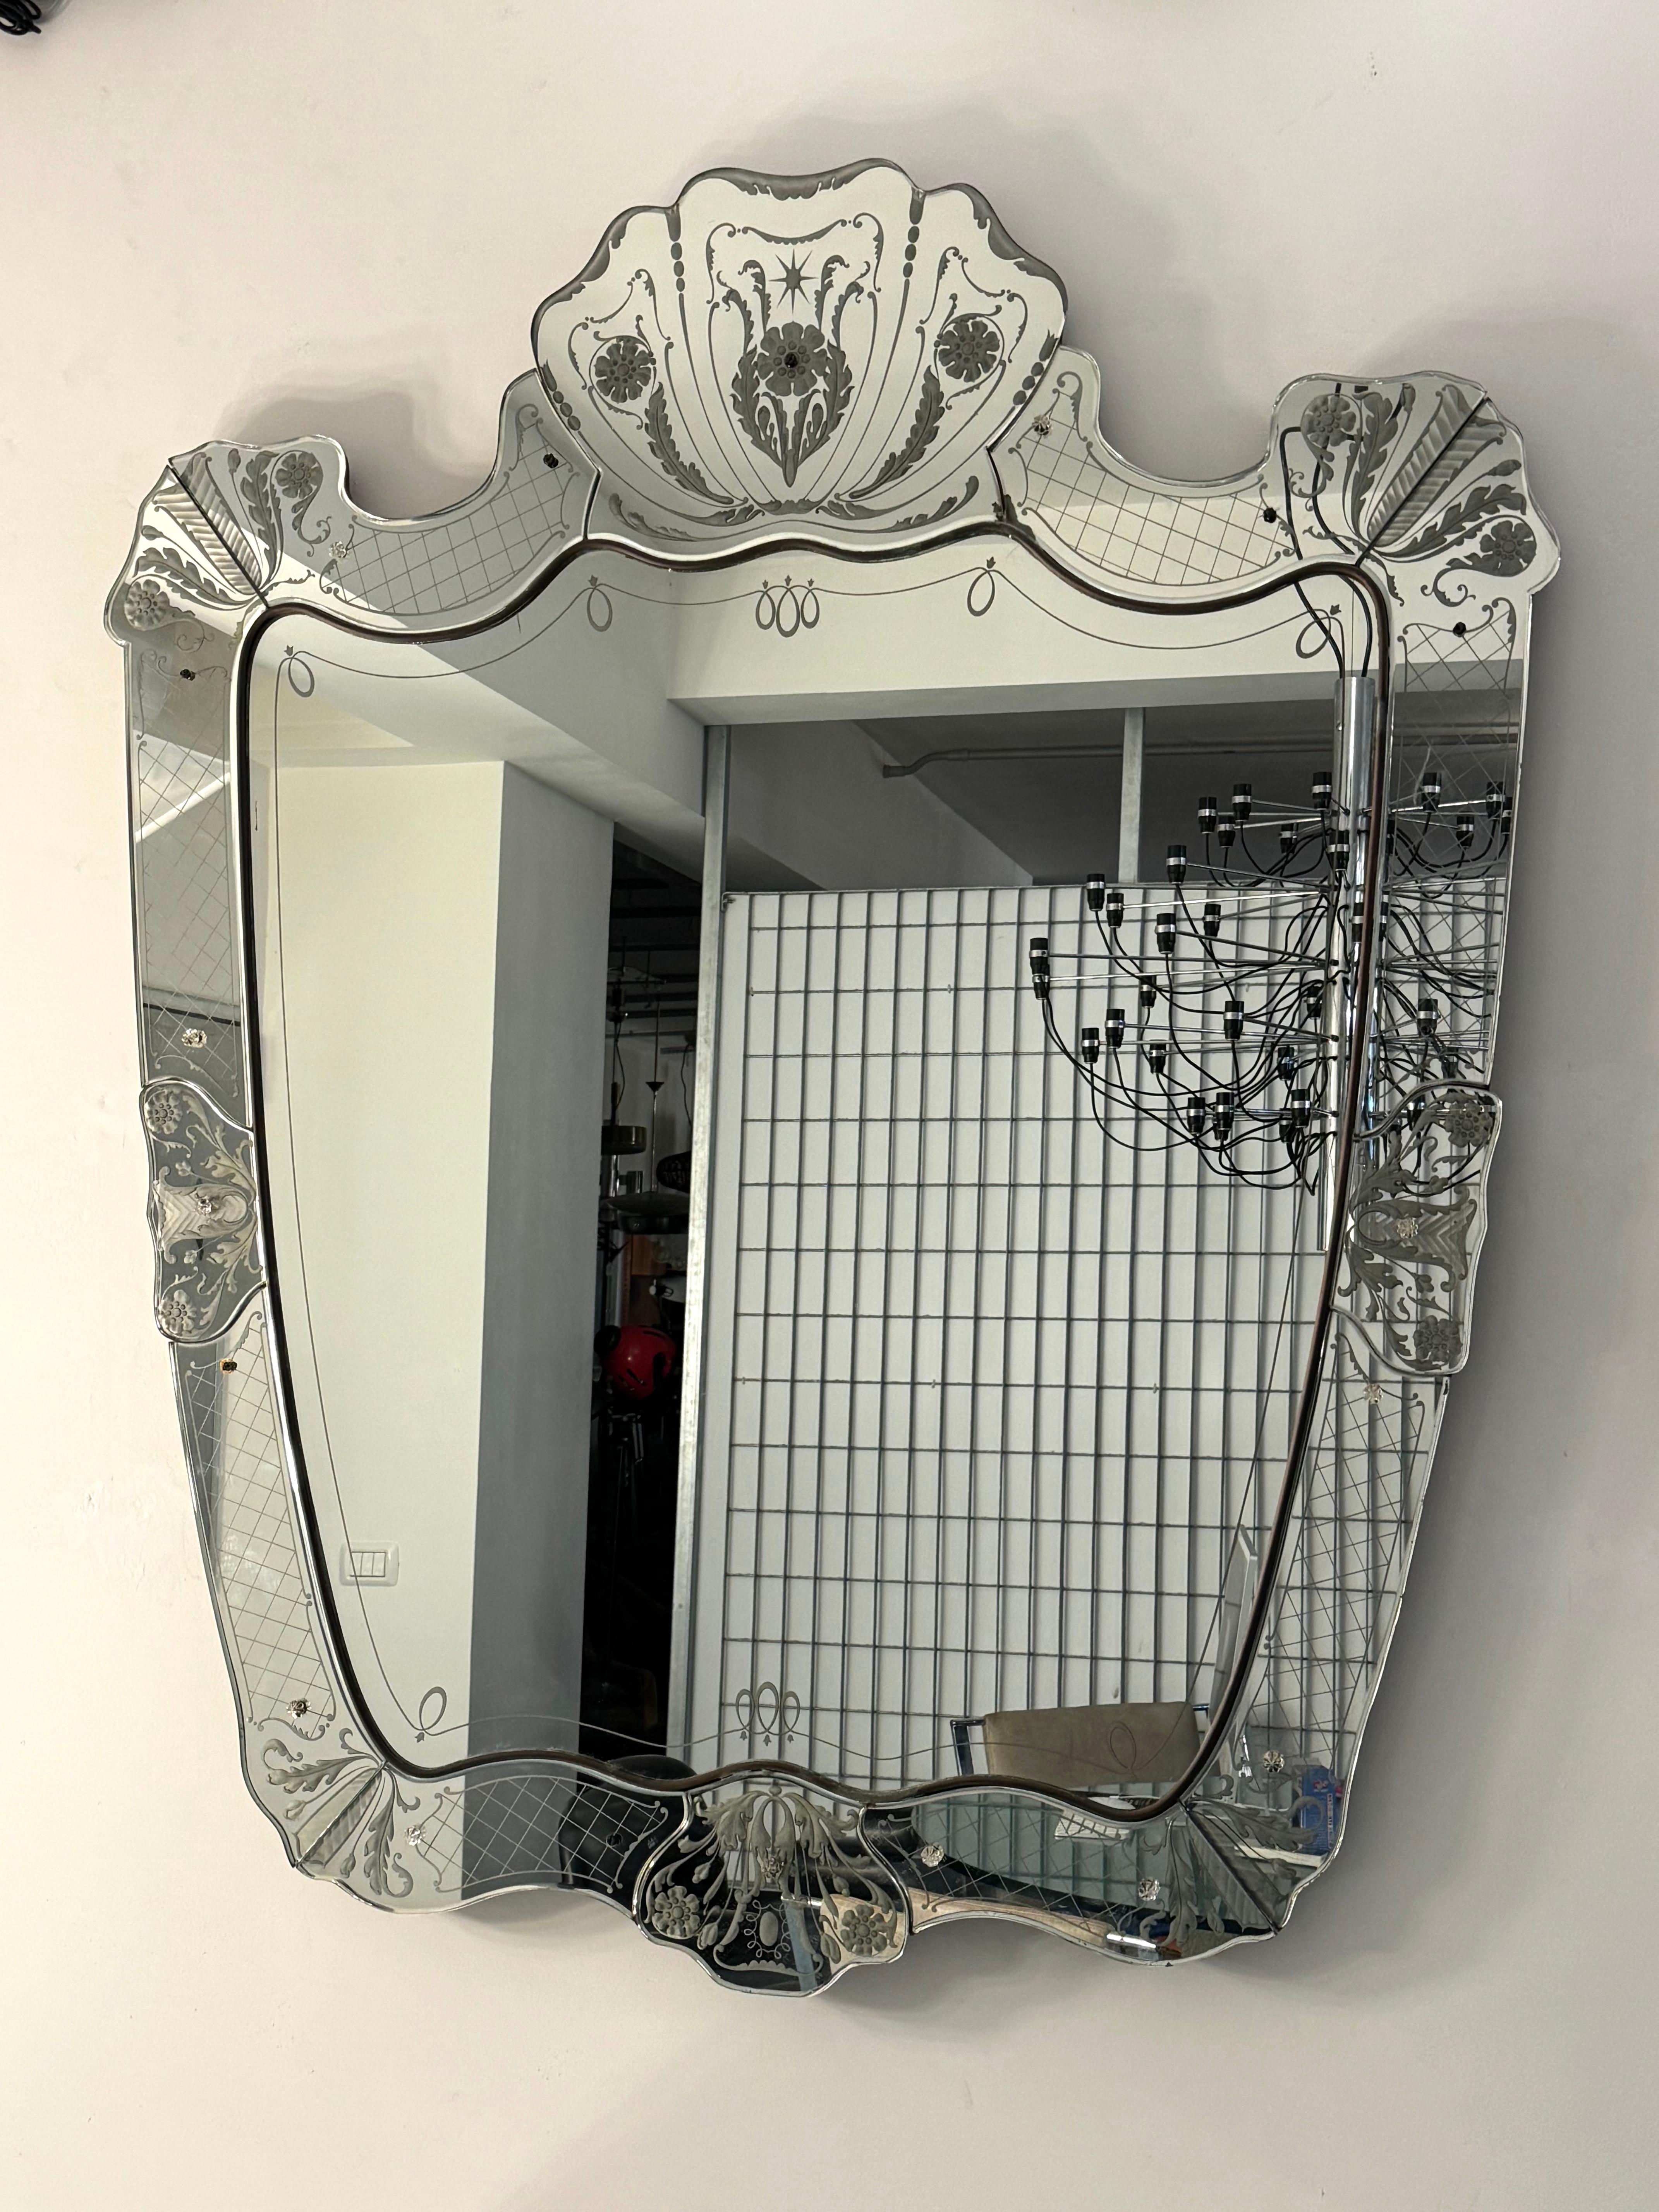 Remarkable Pietro Chiesa manner, large Venetian mirror produced in Italy during the 40s. Moled edge glass and details in brass. The back is in thick wood. To be noticed that the condition are unaltered and there are some small glass screw covers